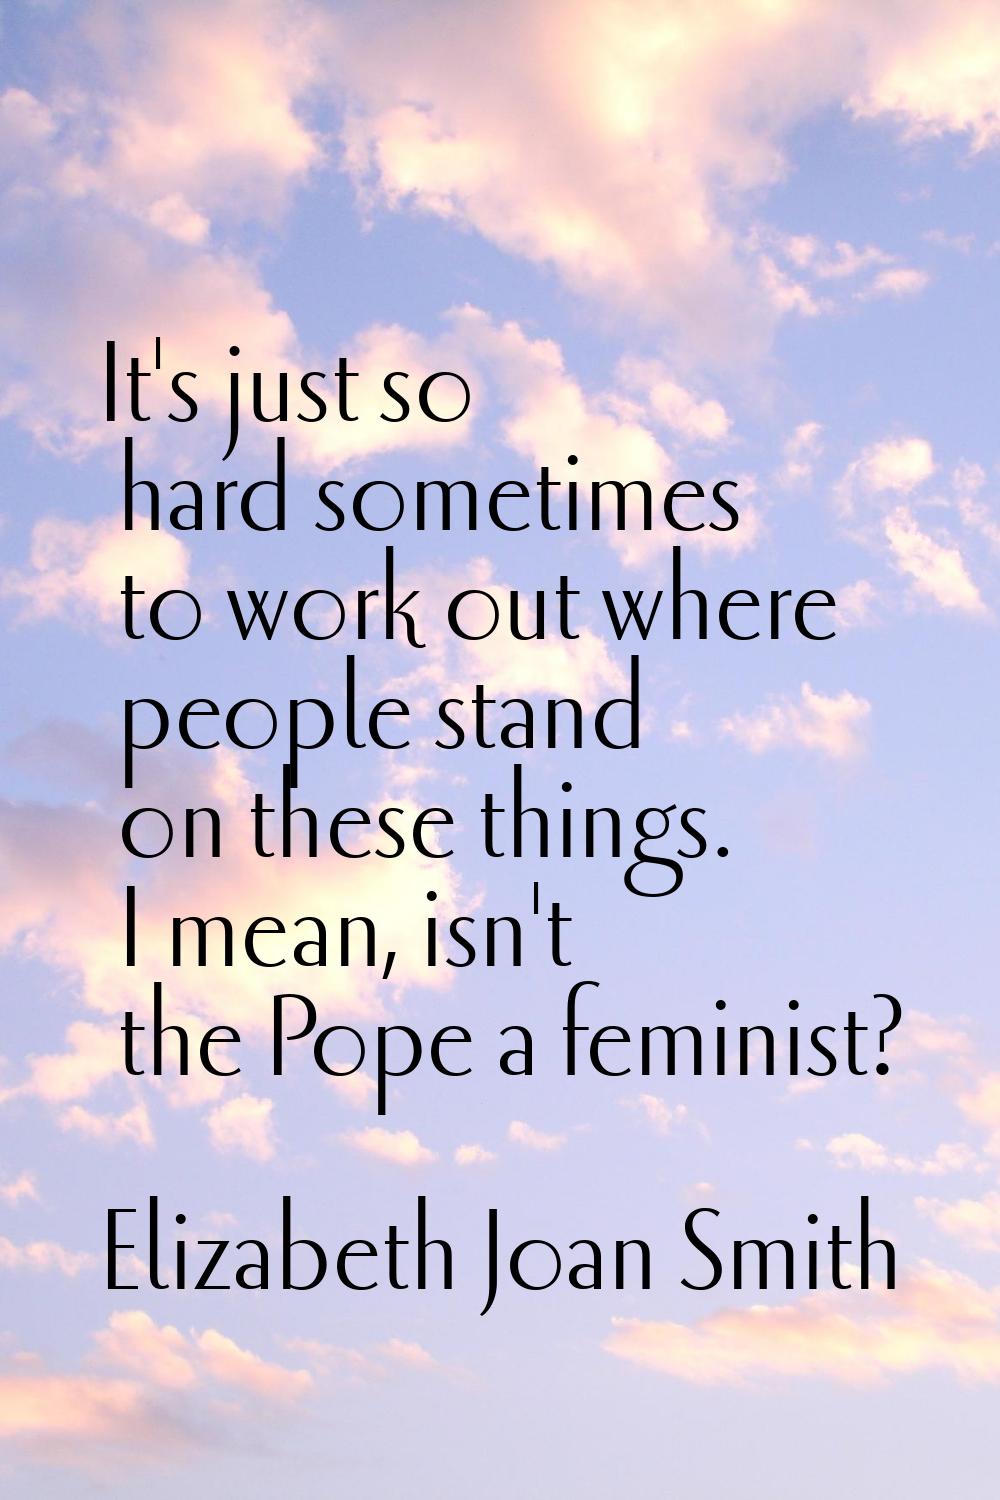 It's just so hard sometimes to work out where people stand on these things. I mean, isn't the Pope 